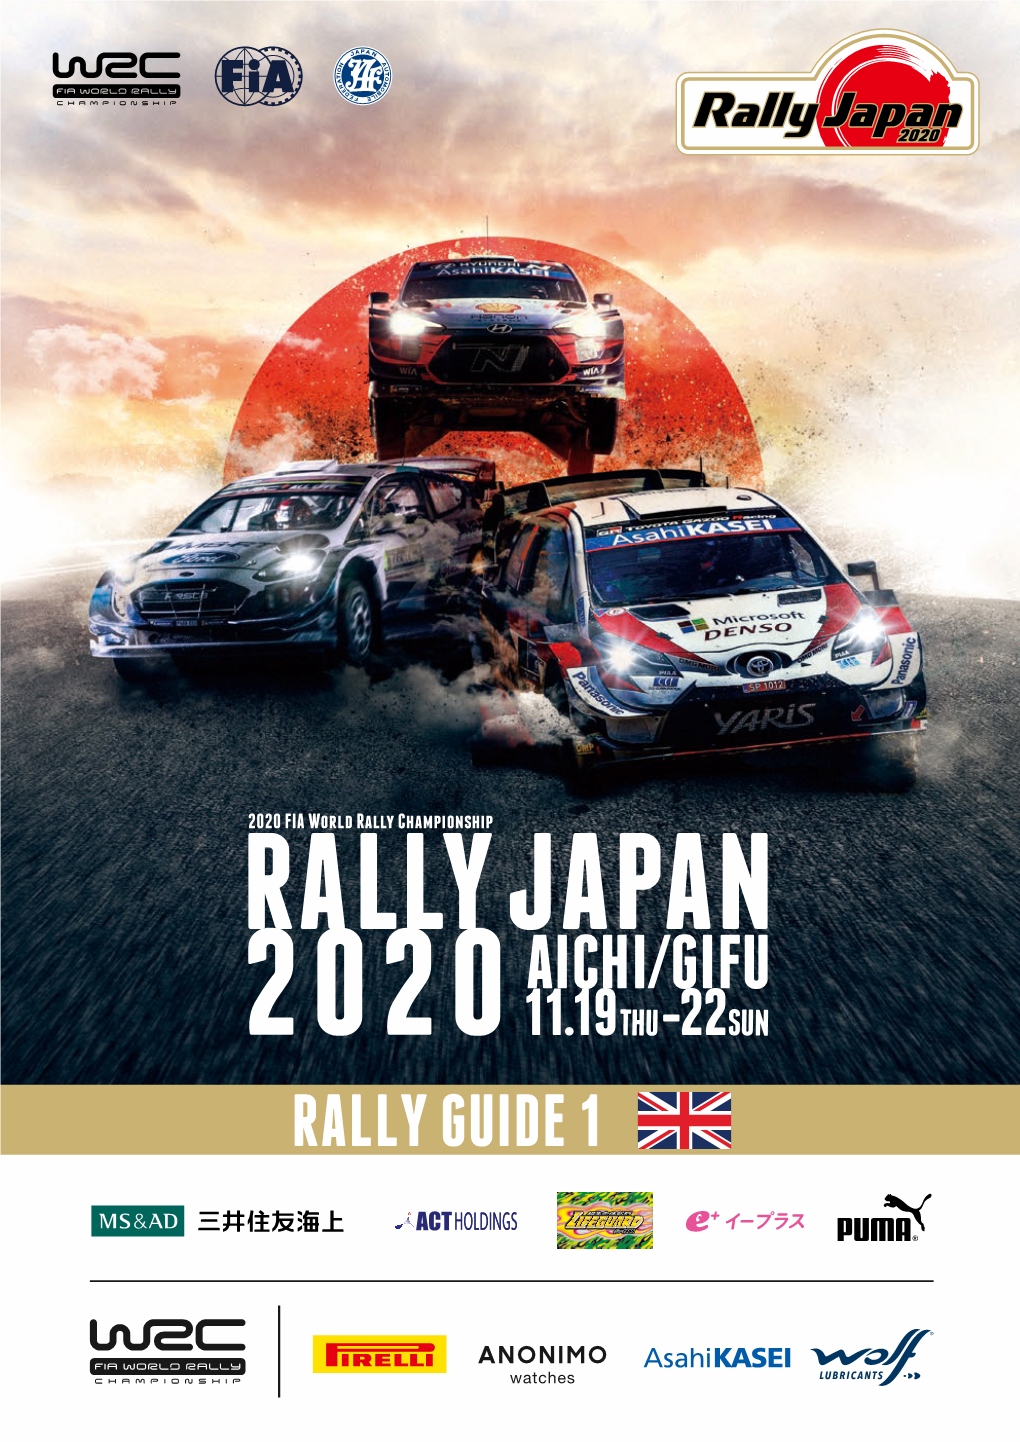 Rally Guide 1